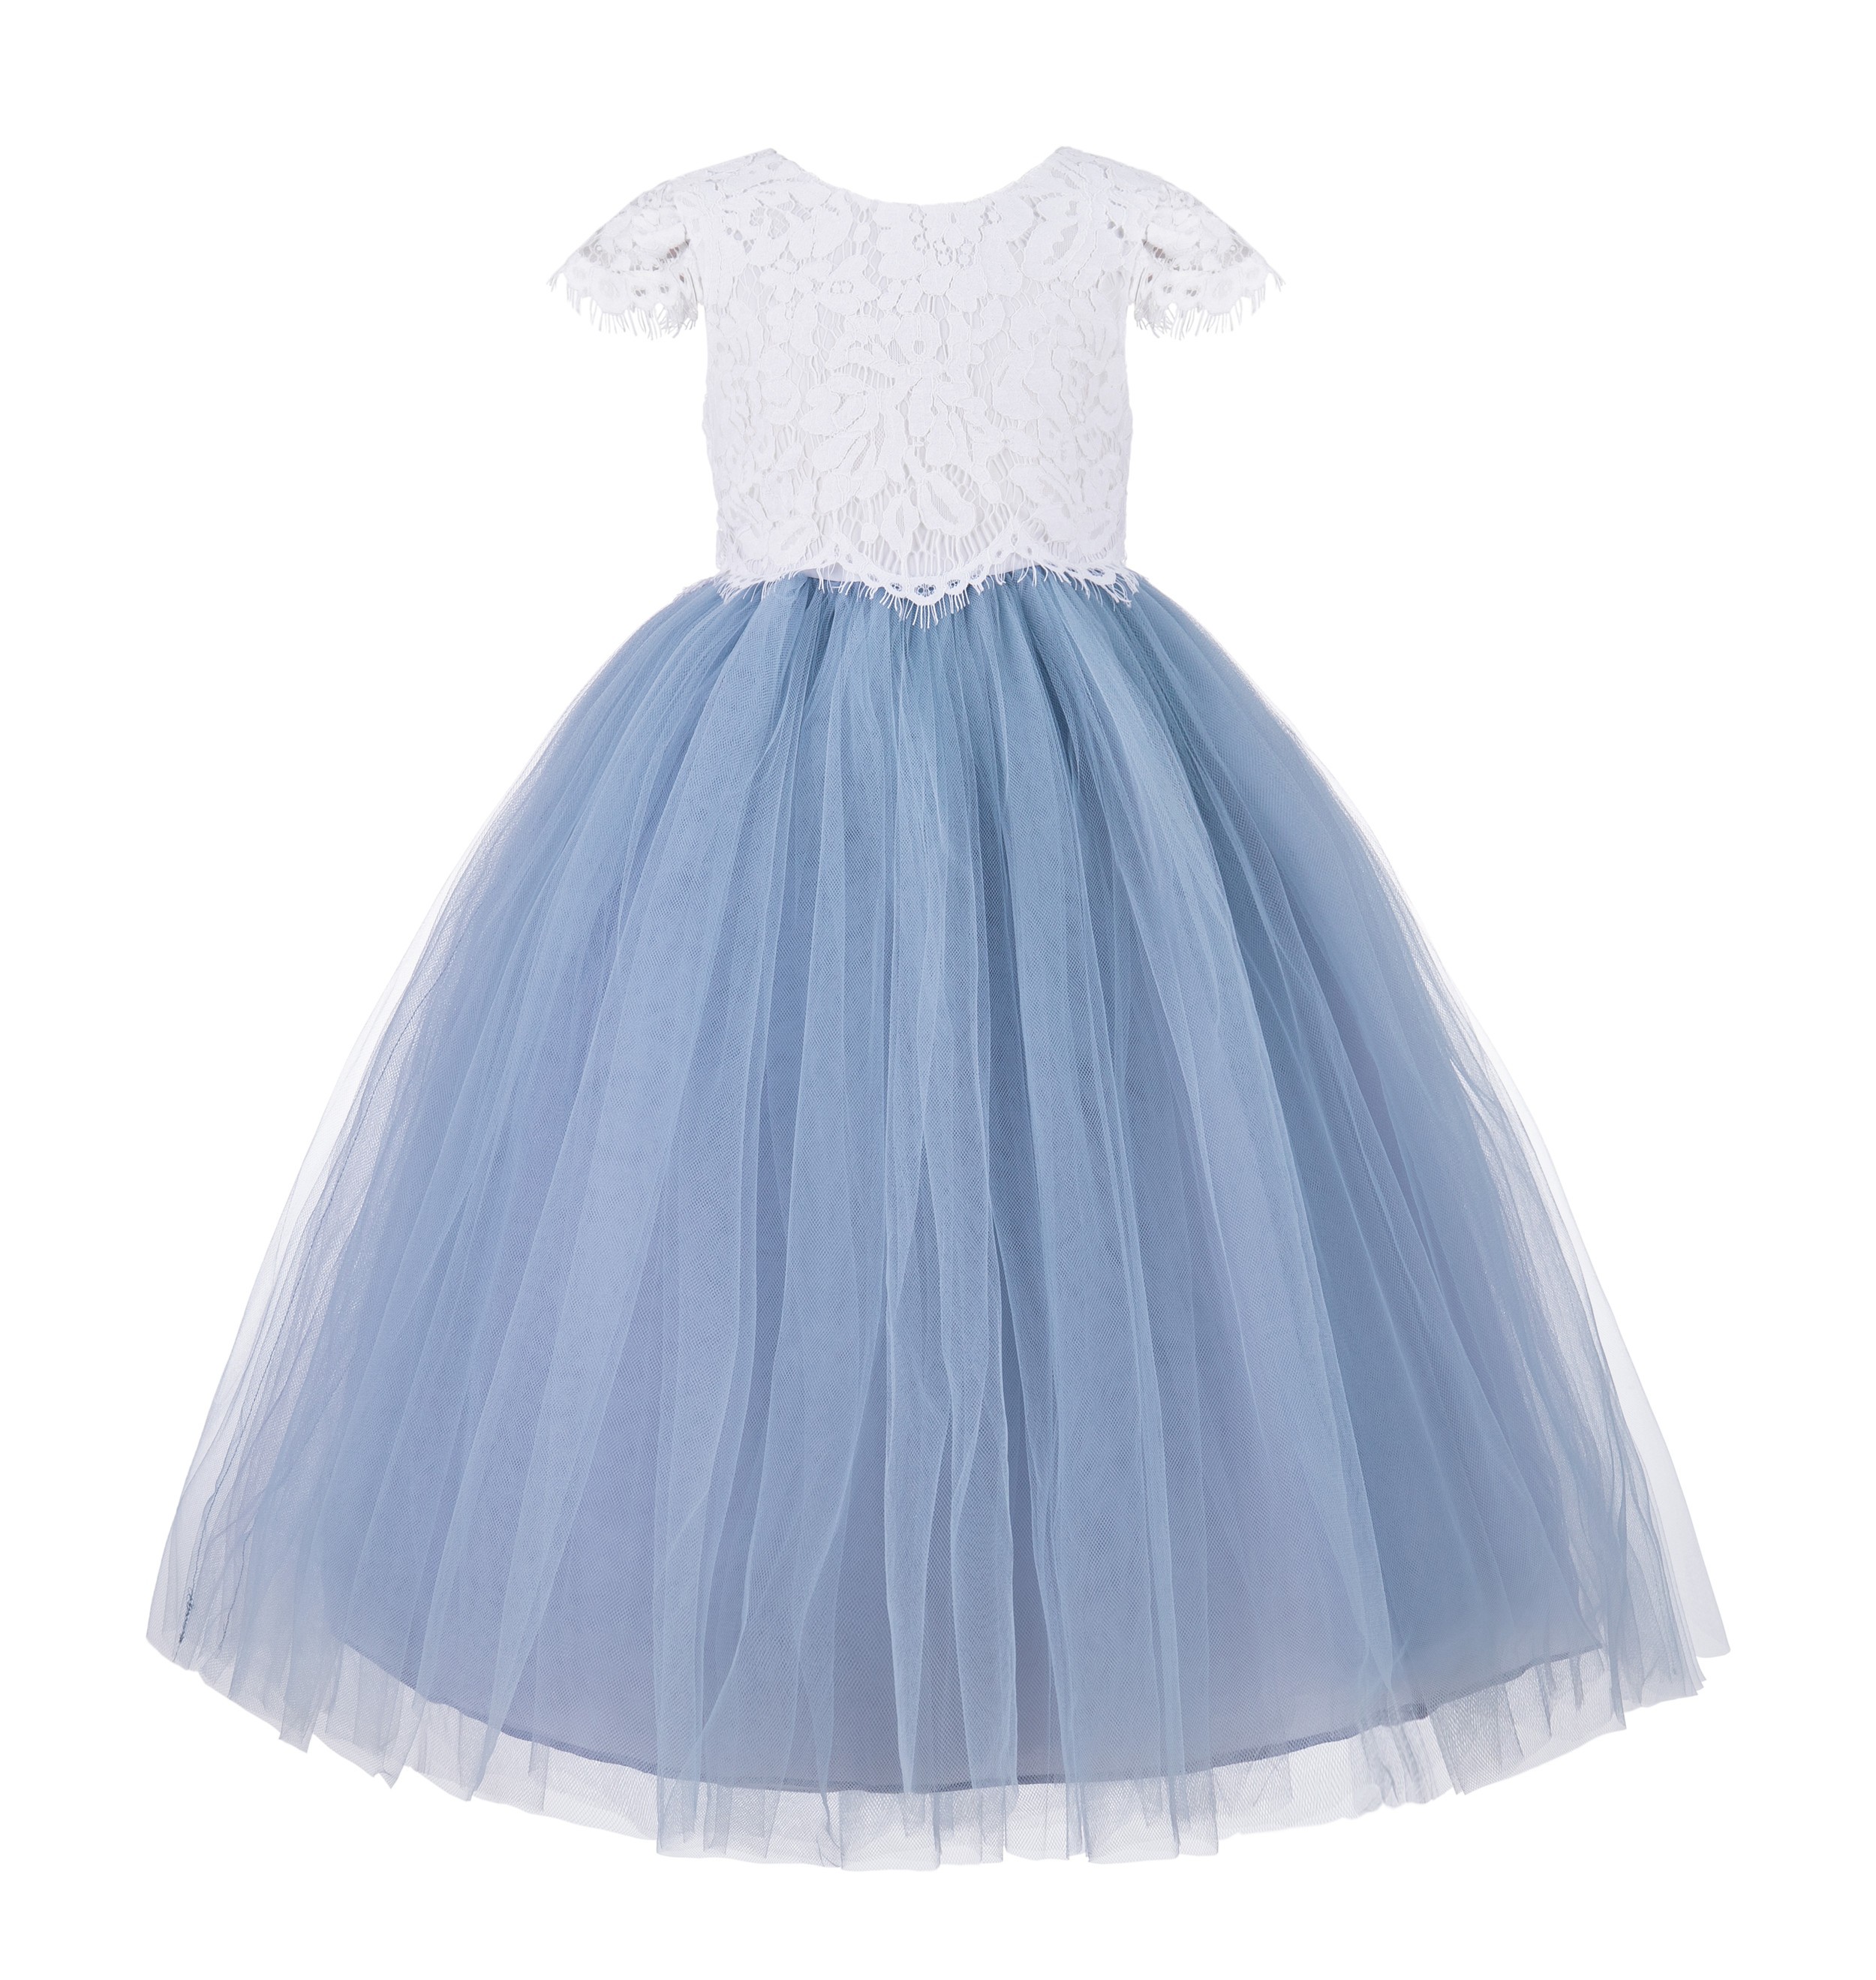 Dusty Blue Floral Lace Flower Girl Dress Cap Sleeves 214